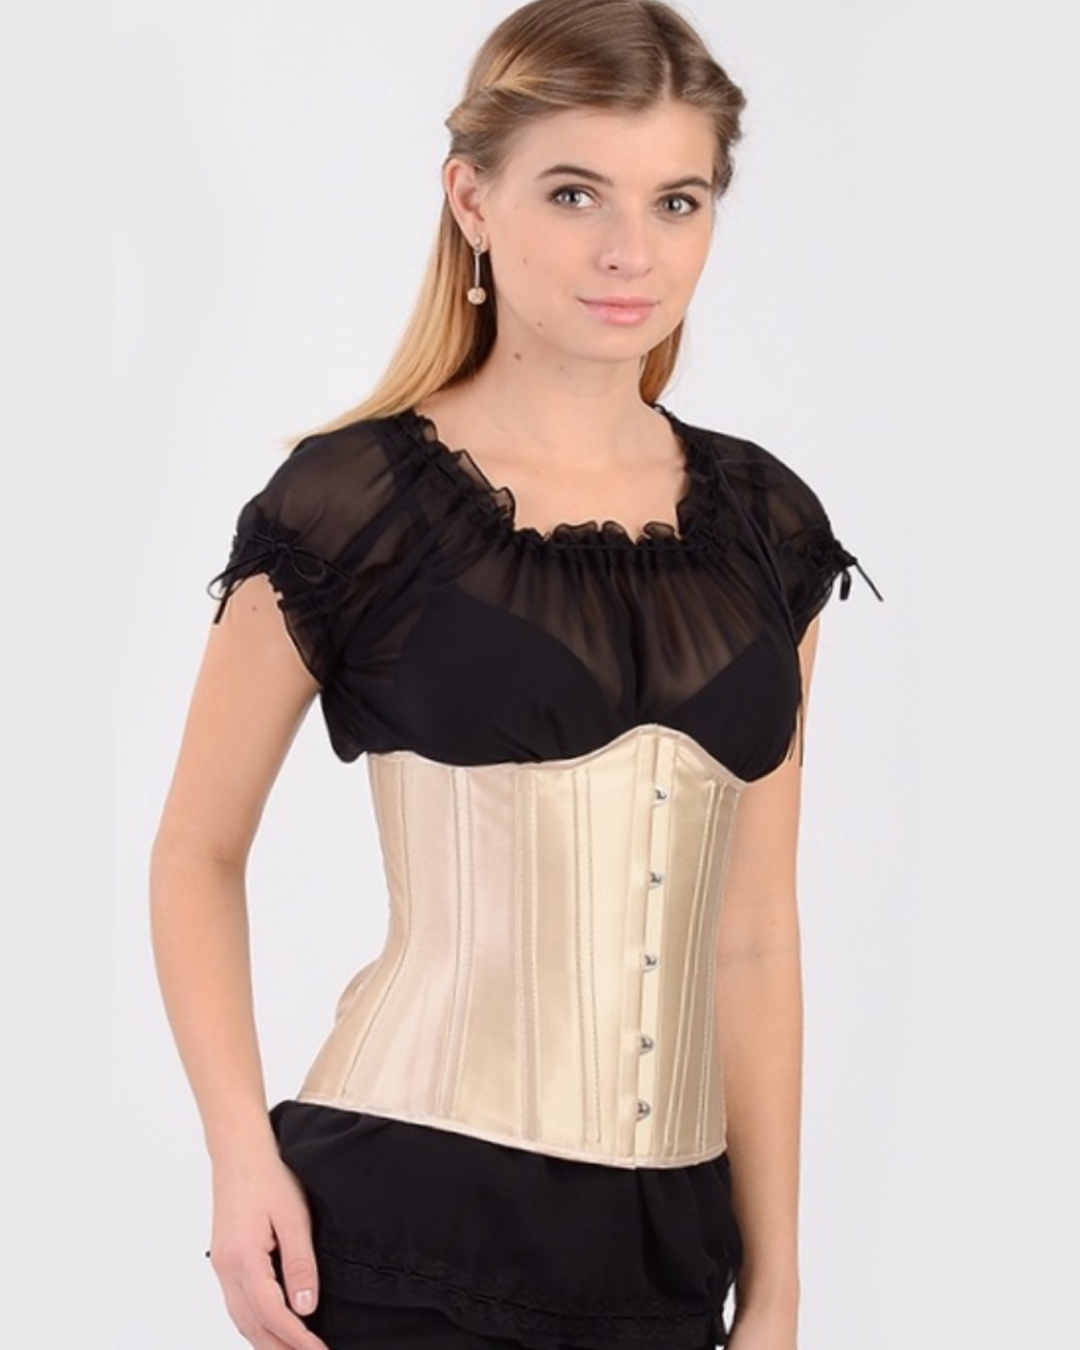 Underbust corset with a blouse – Exclusive Corsets